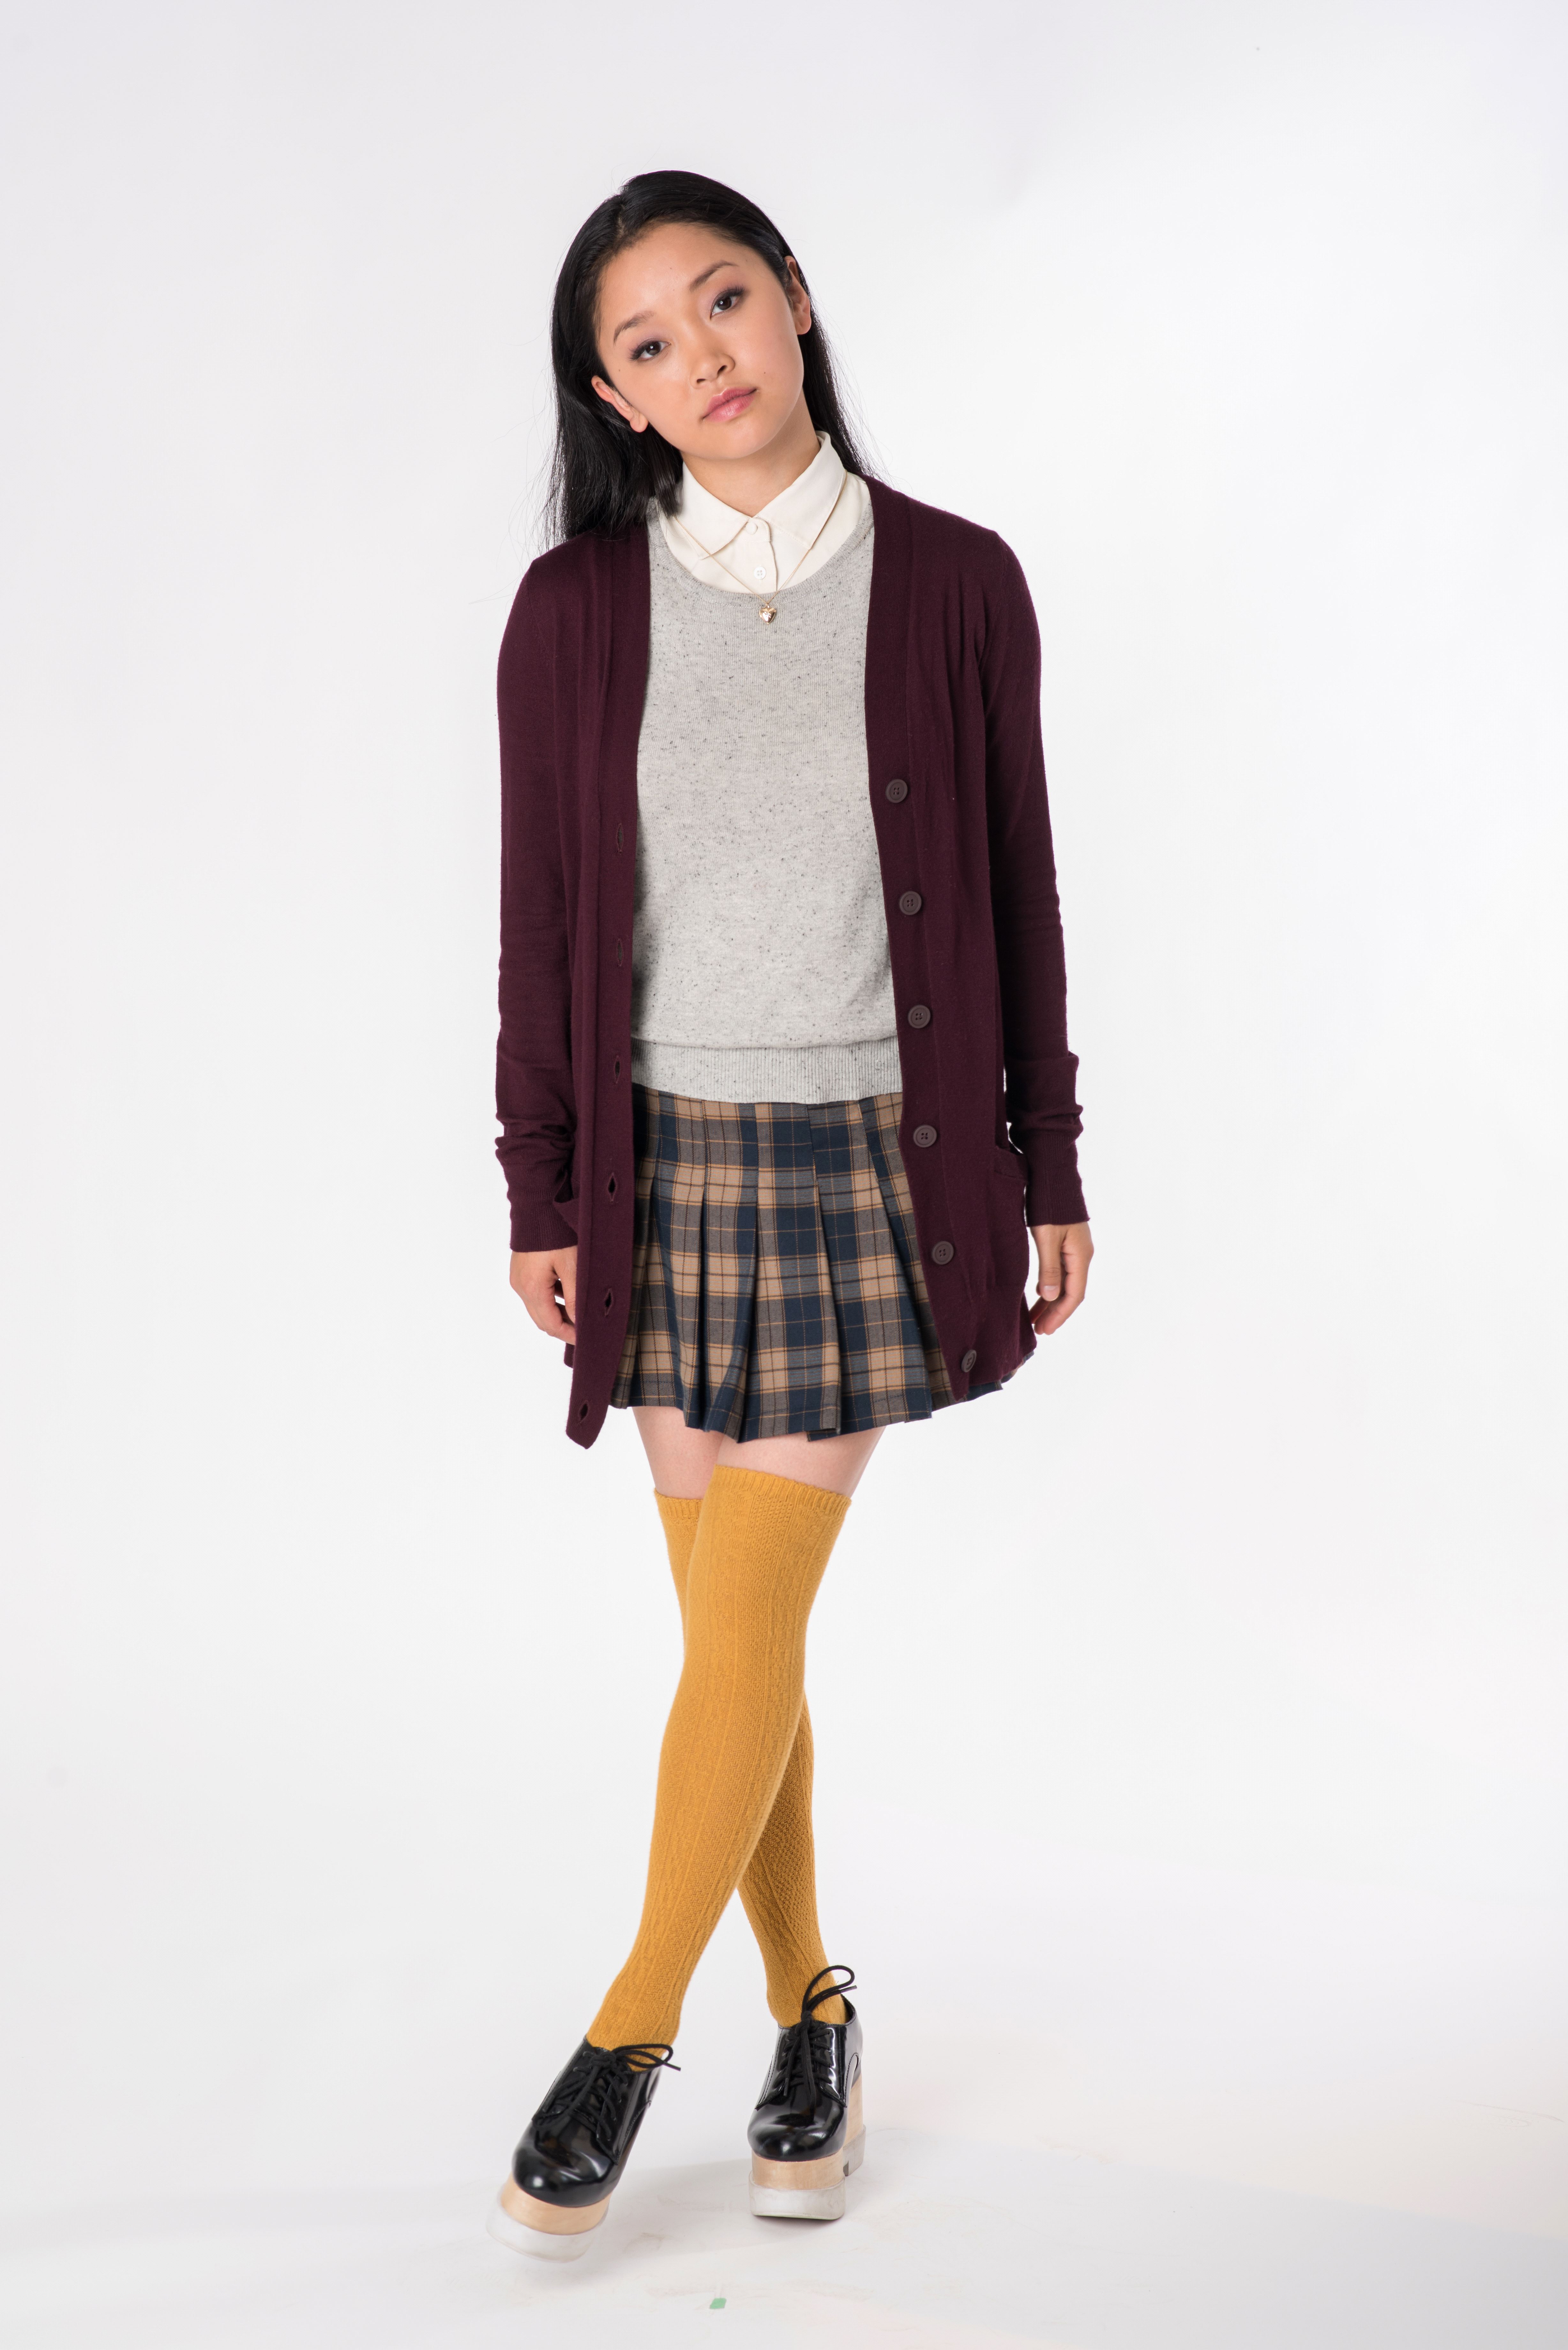 Lana Condor in the role of Lara Jean Covey in the Netflix show "To All the Boys I've Loved Before" in an ensamble created by Rafaella Rabinovich / NETFLIX 